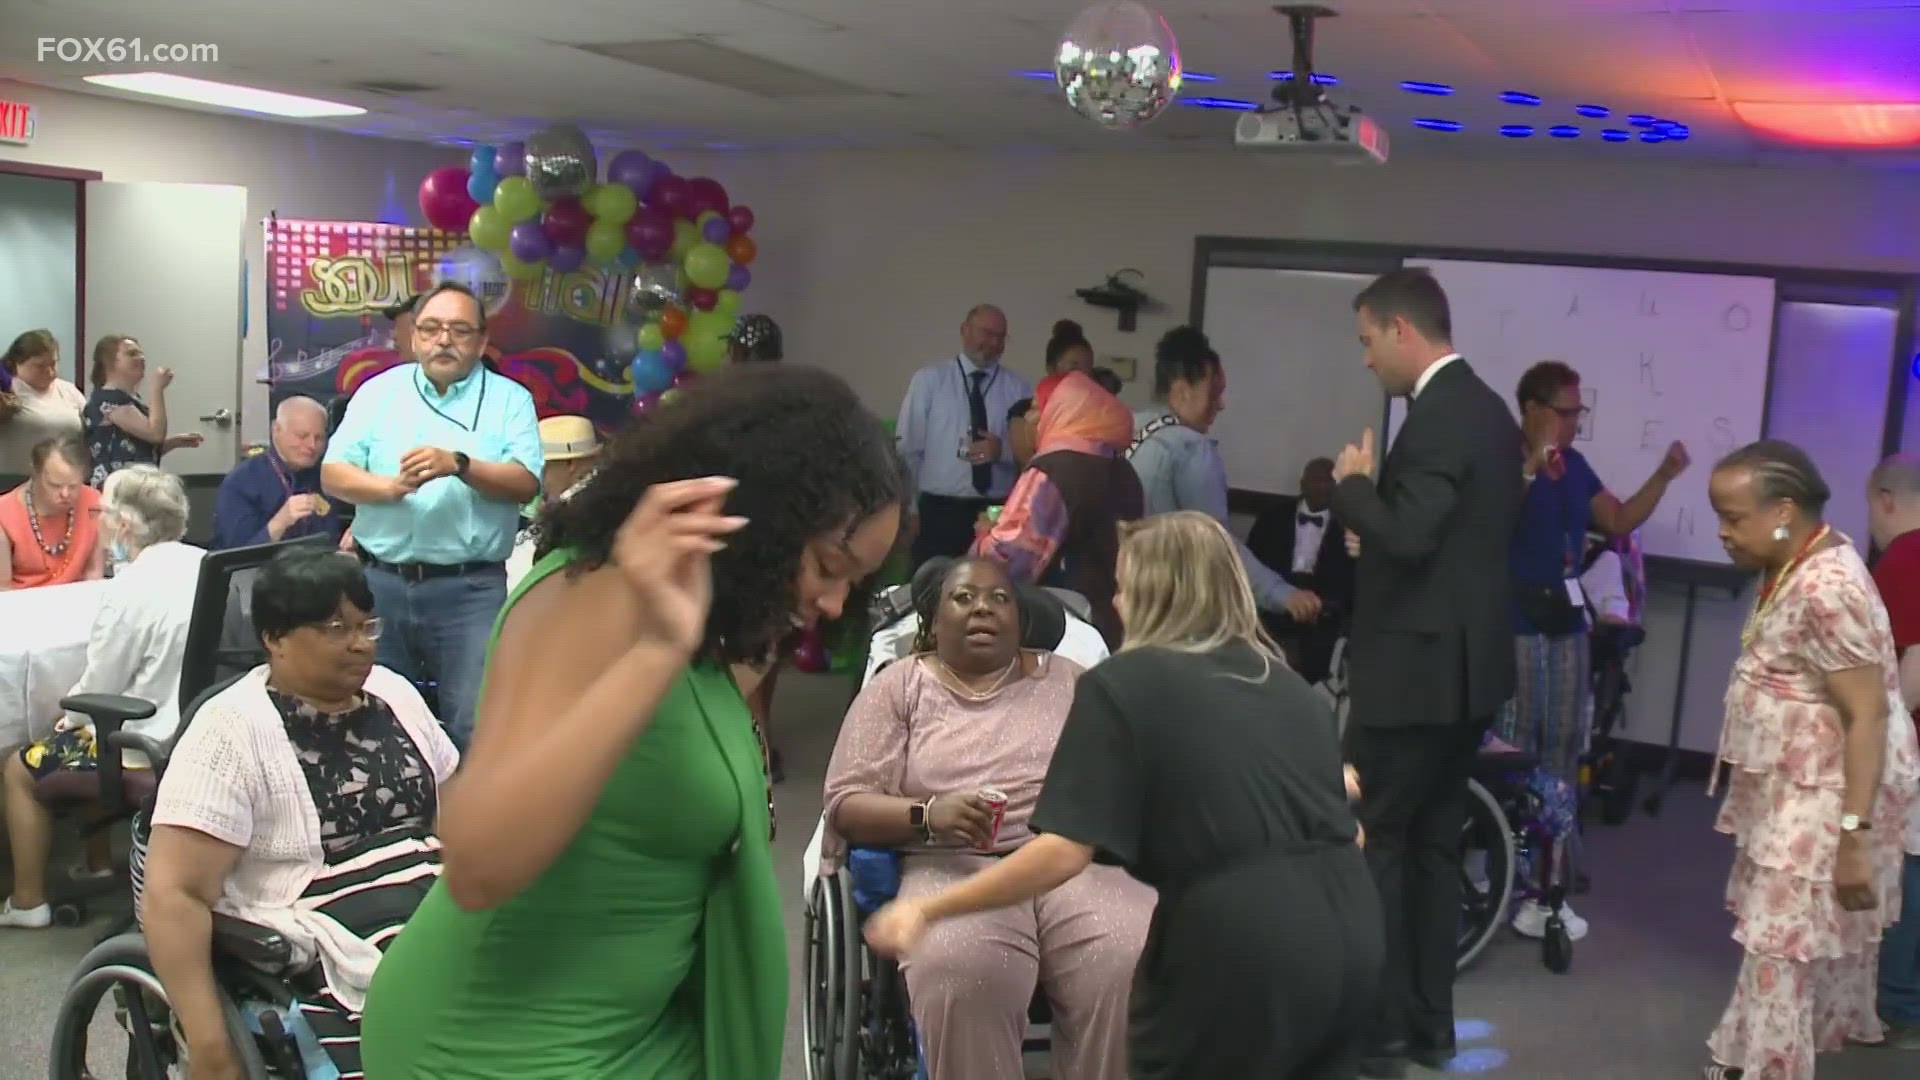 HARC celebrates people of all abilities, and today they were able to celebrate themselves.